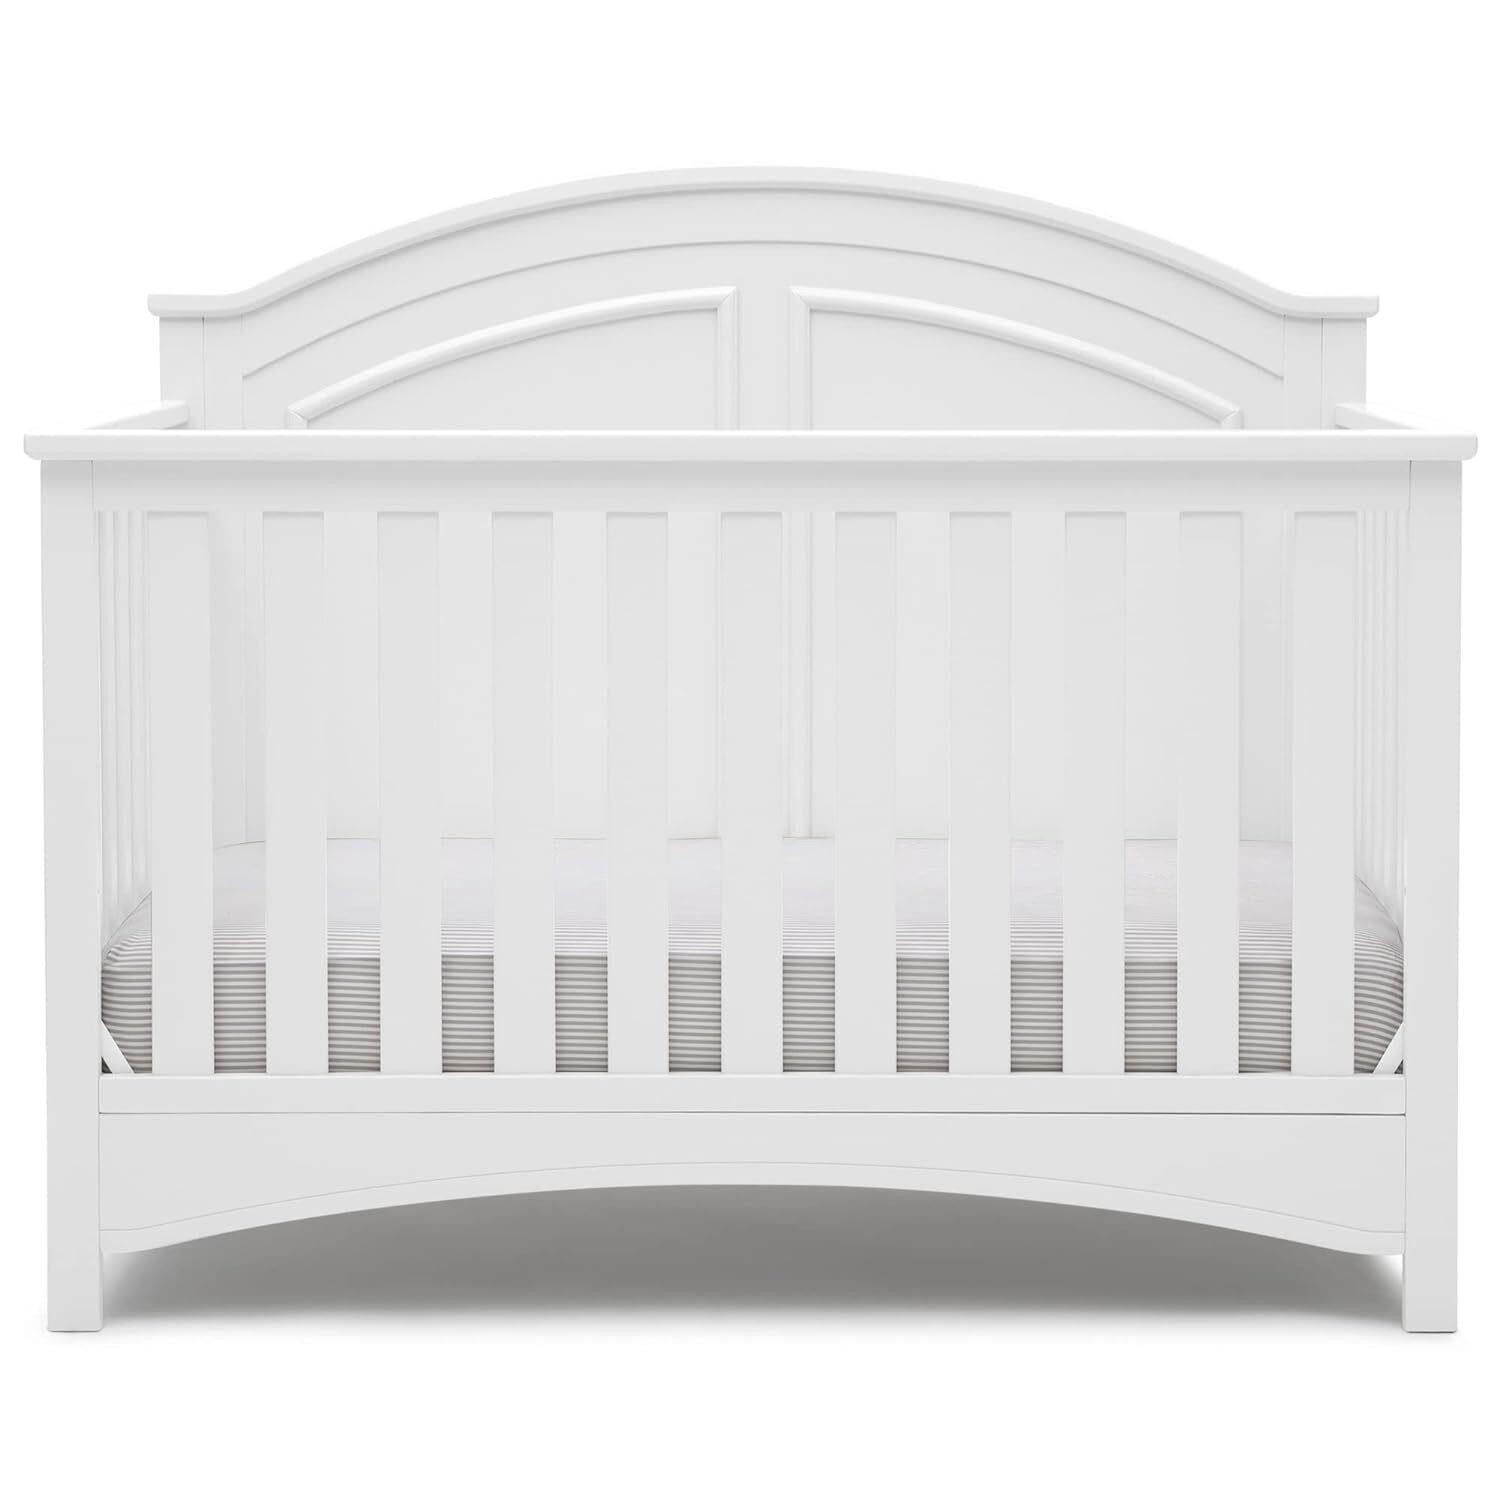 Perry 6-in-1 Convertible Crib - Greenguard Gold Ce